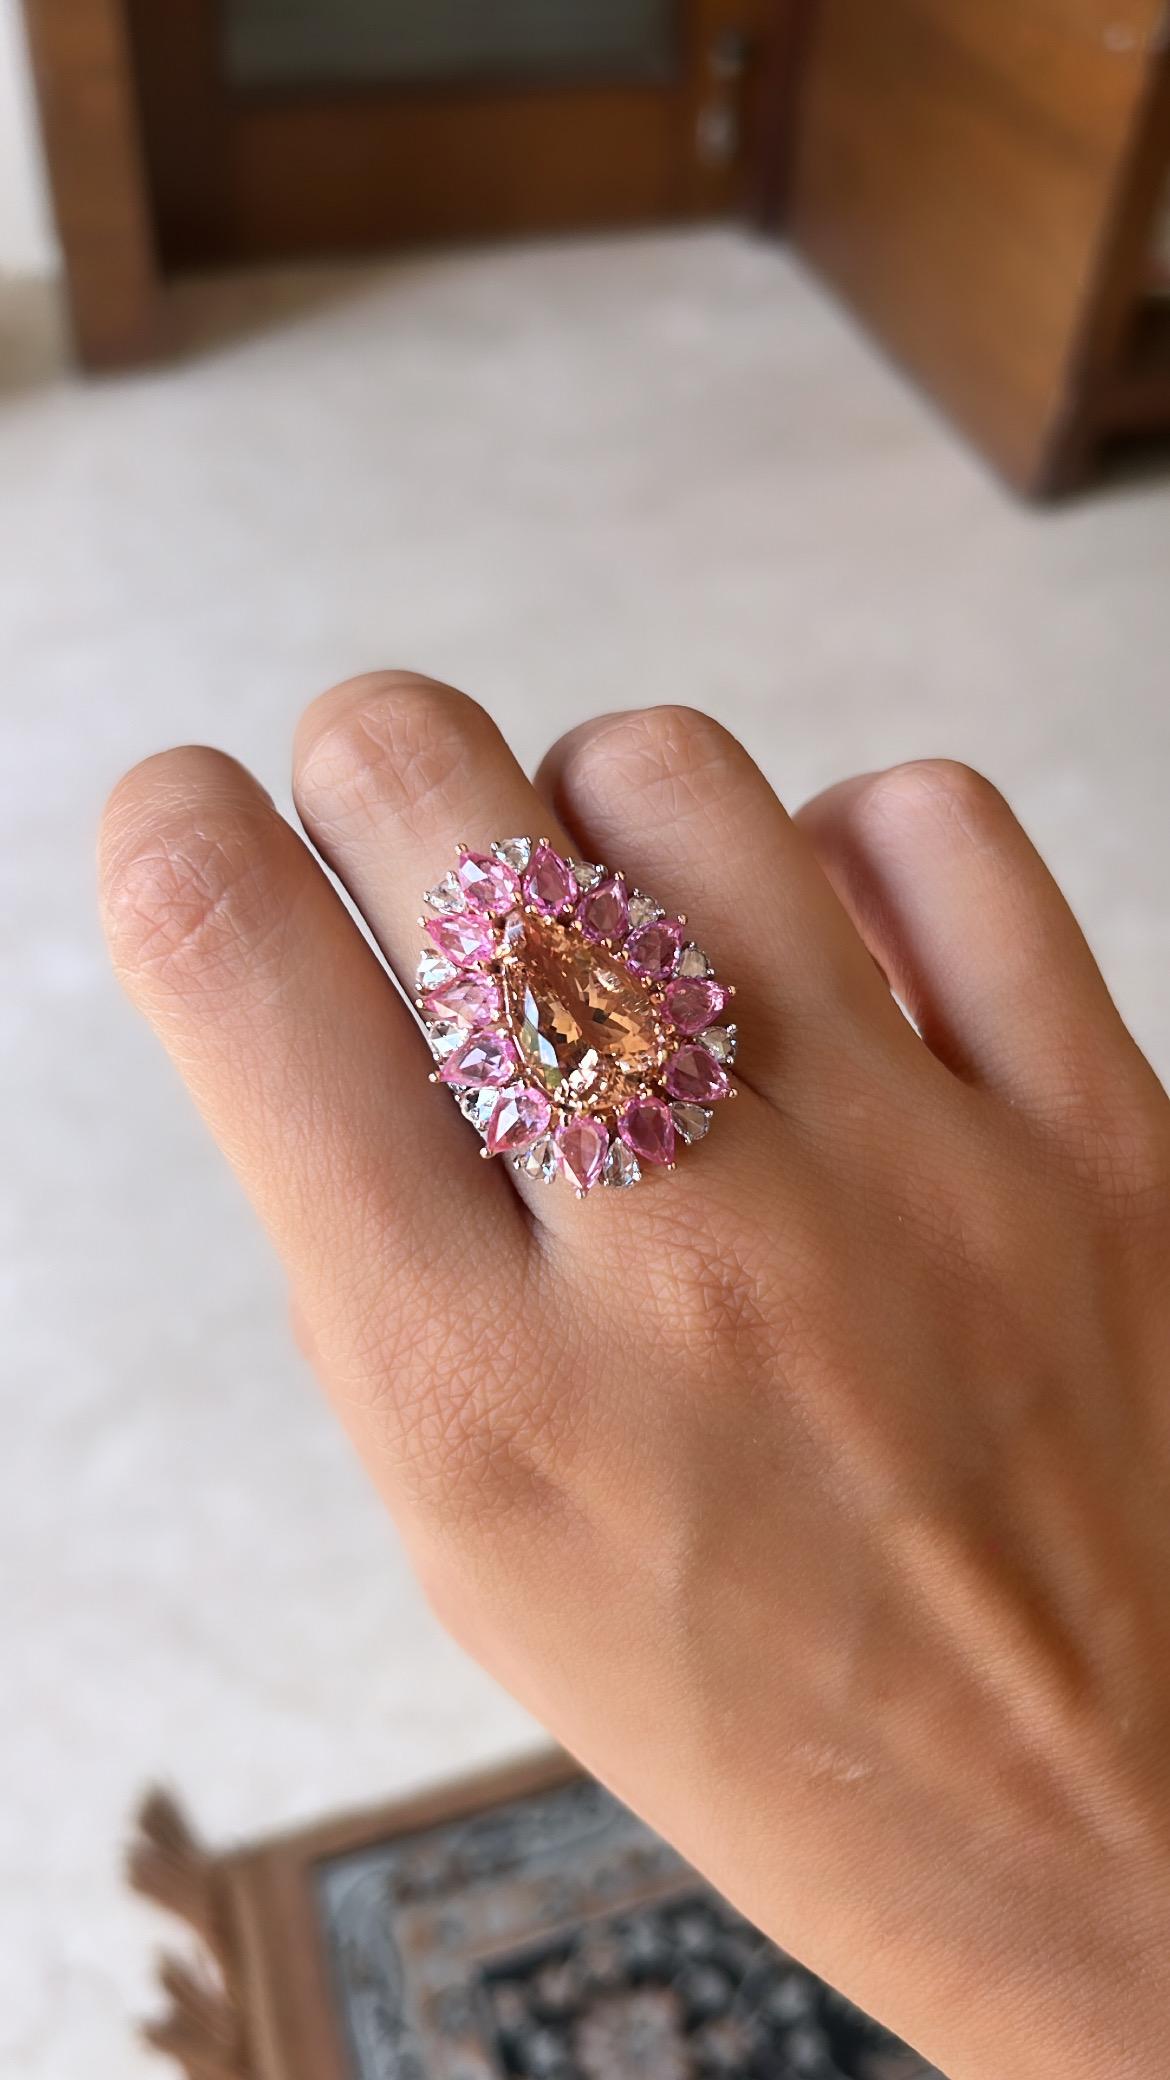 A very gorgeous and one of a kind, Morganite & Pink Sapphires Cocktail Ring set in 18K Rose Gold. The weight of the Morganite is 7.05 carats. The Morganite is natural, without any treatment. The weight of the Pink Sapphires is 3.76 carats. The Pink